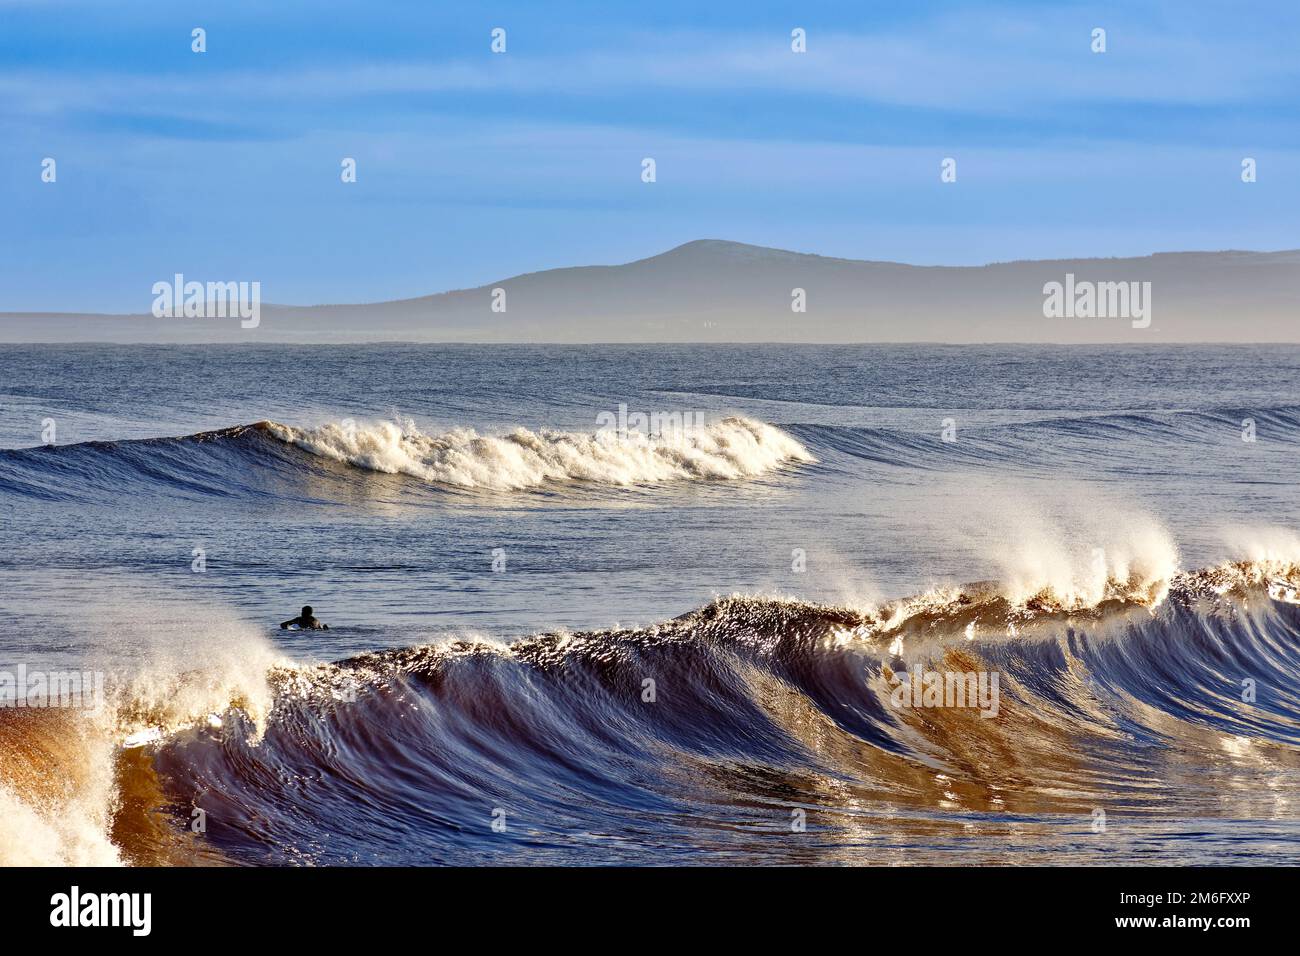 Lossiemouth East Beach Moray coast Scotland curling waves with spray and a surfer waiting for a wave Stock Photo